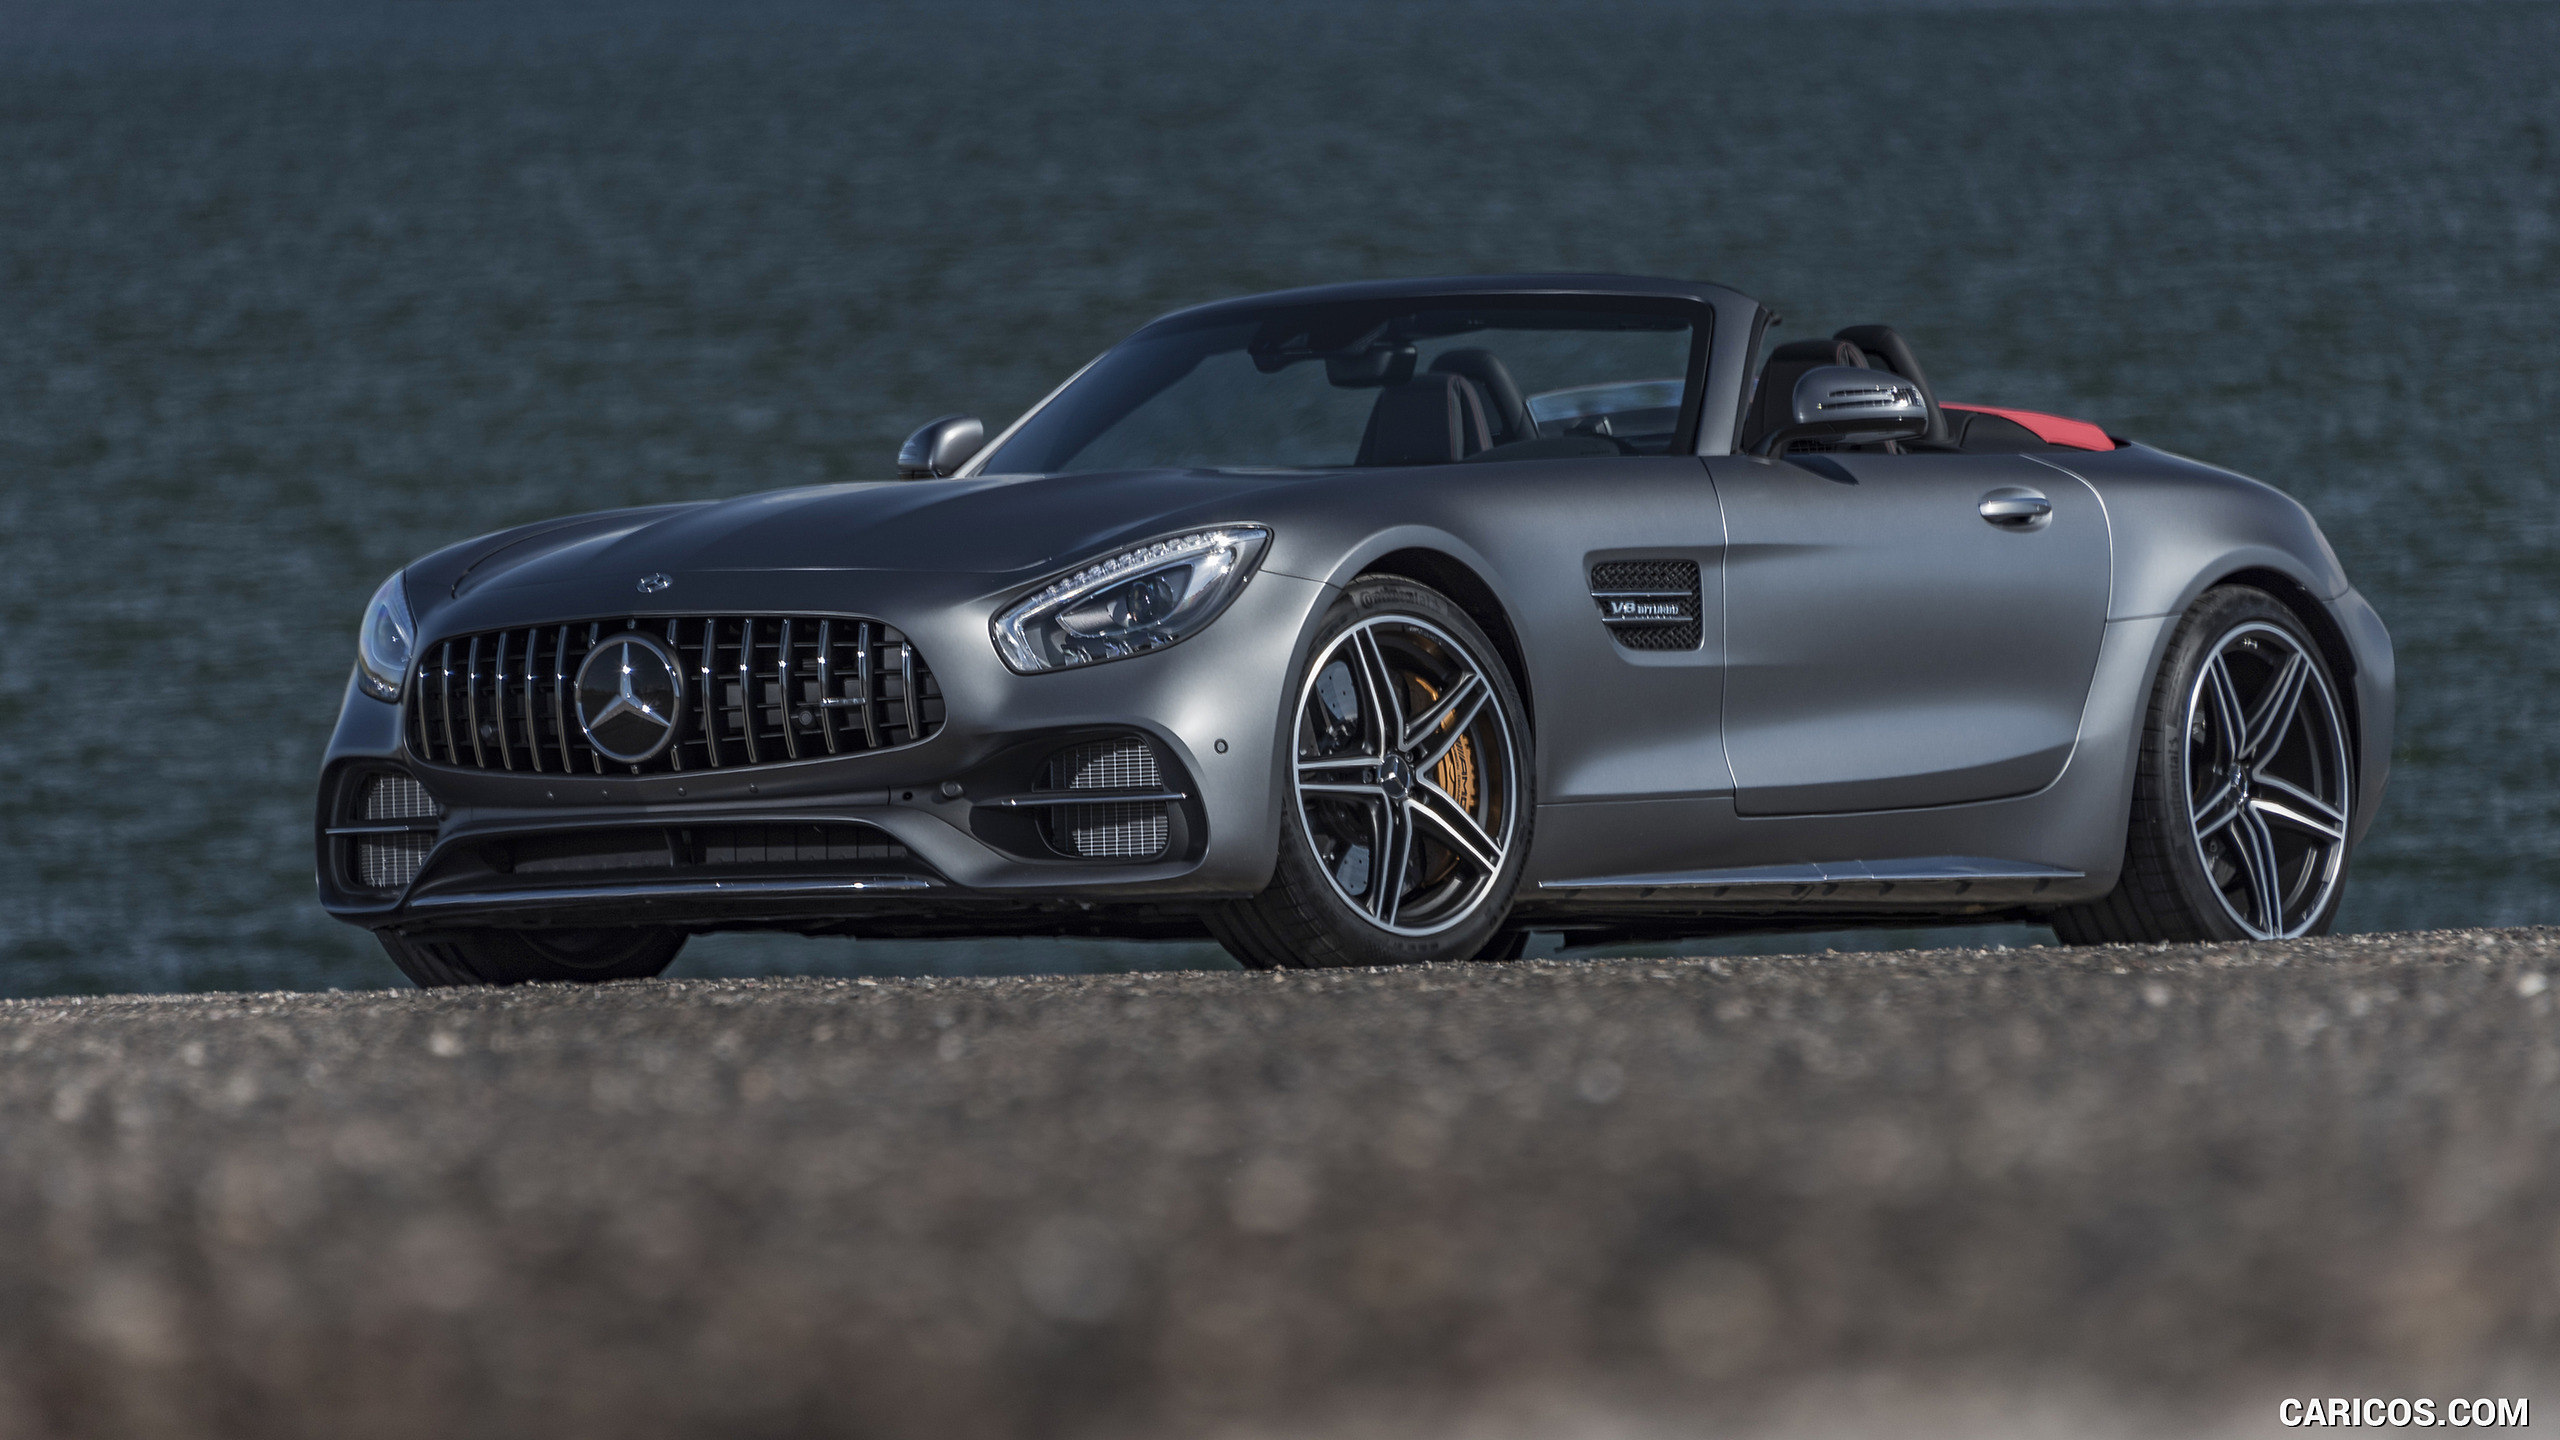 2018 Mercedes-AMG GT C Roadster - Front Three-Quarter, #299 of 350